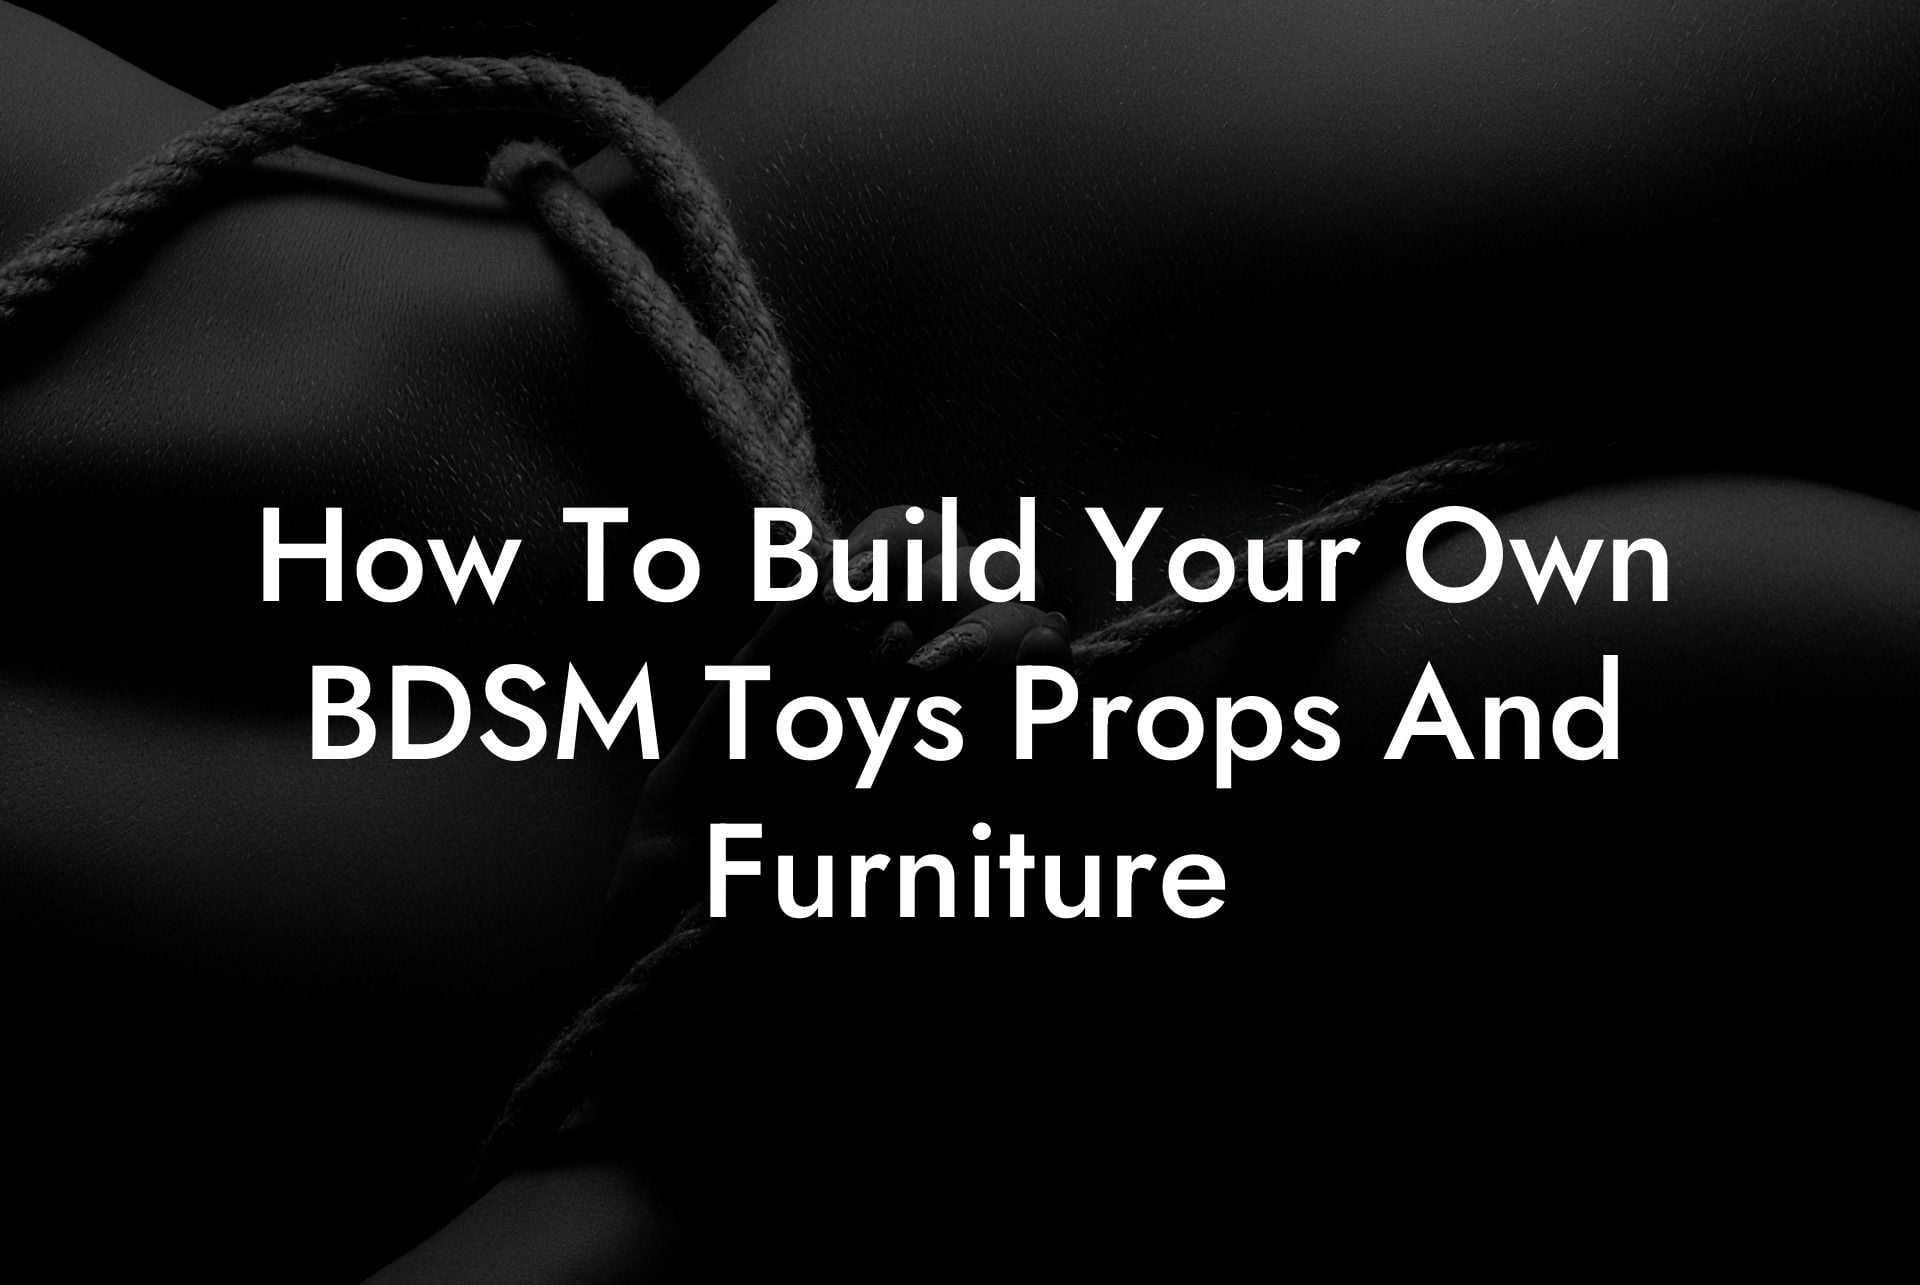 How To Build Your Own BDSM Toys Props And Furniture